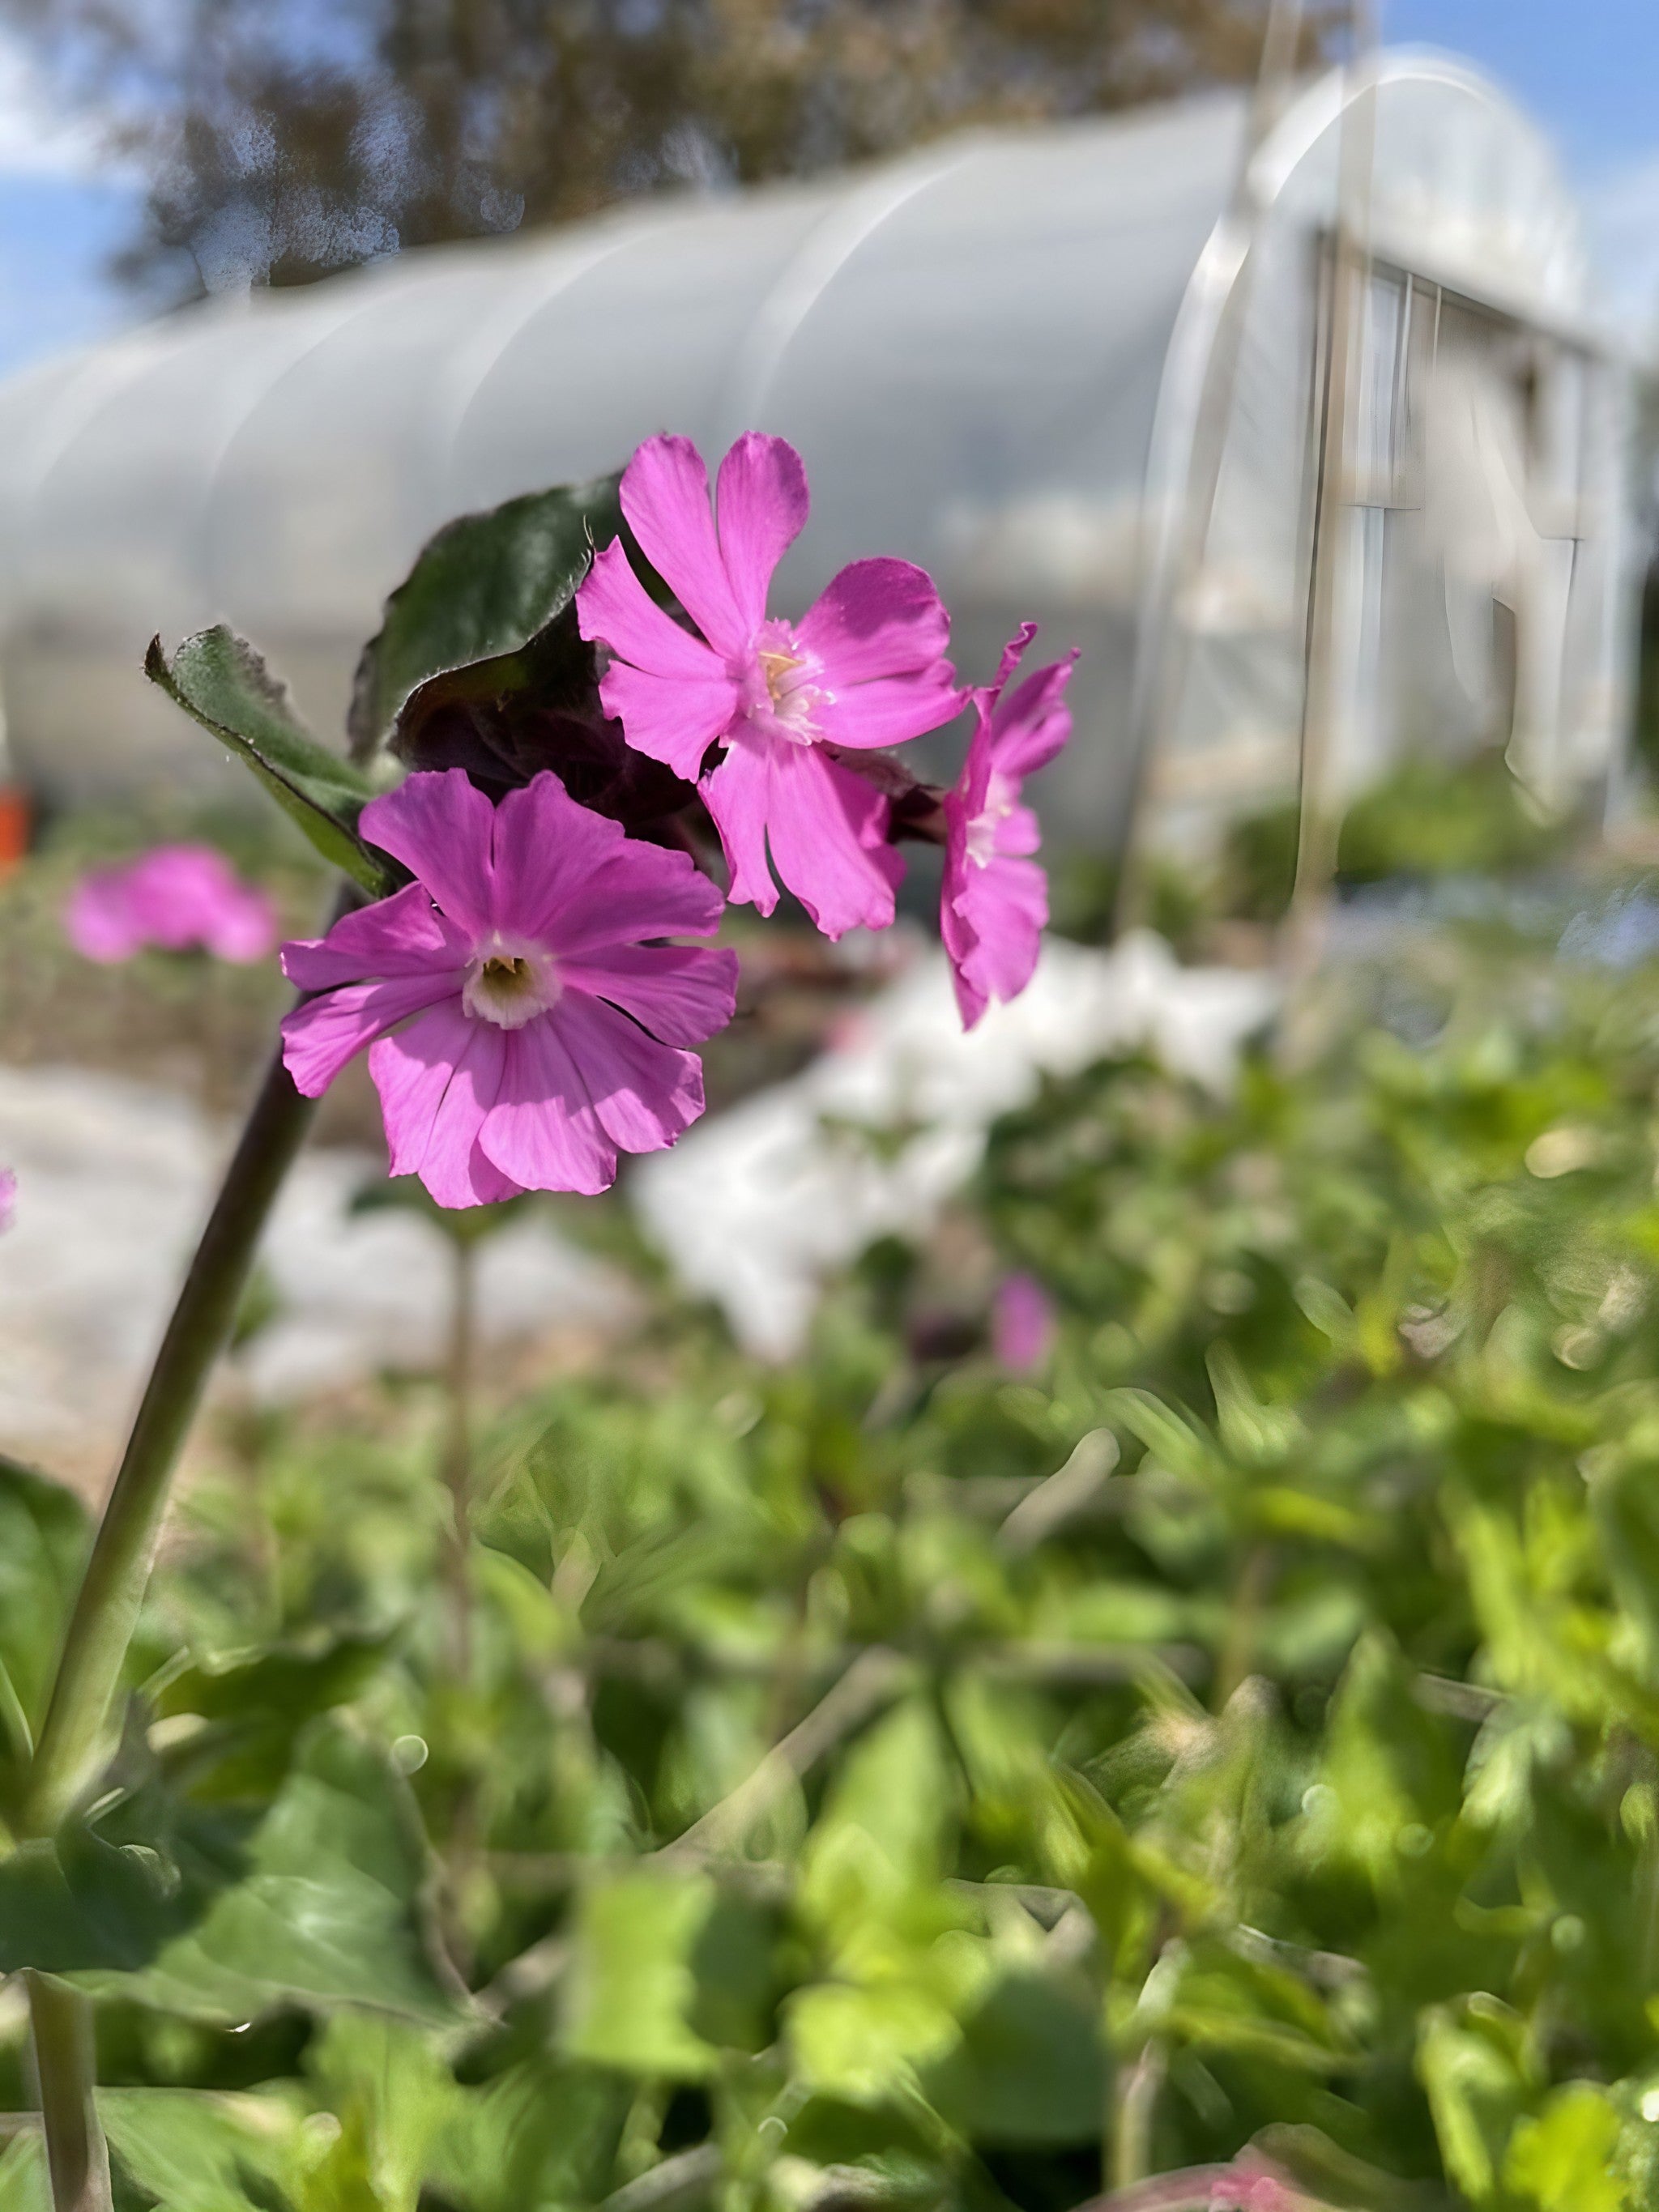 Red Campion flowers with a hint of purple hue inside a greenhouse